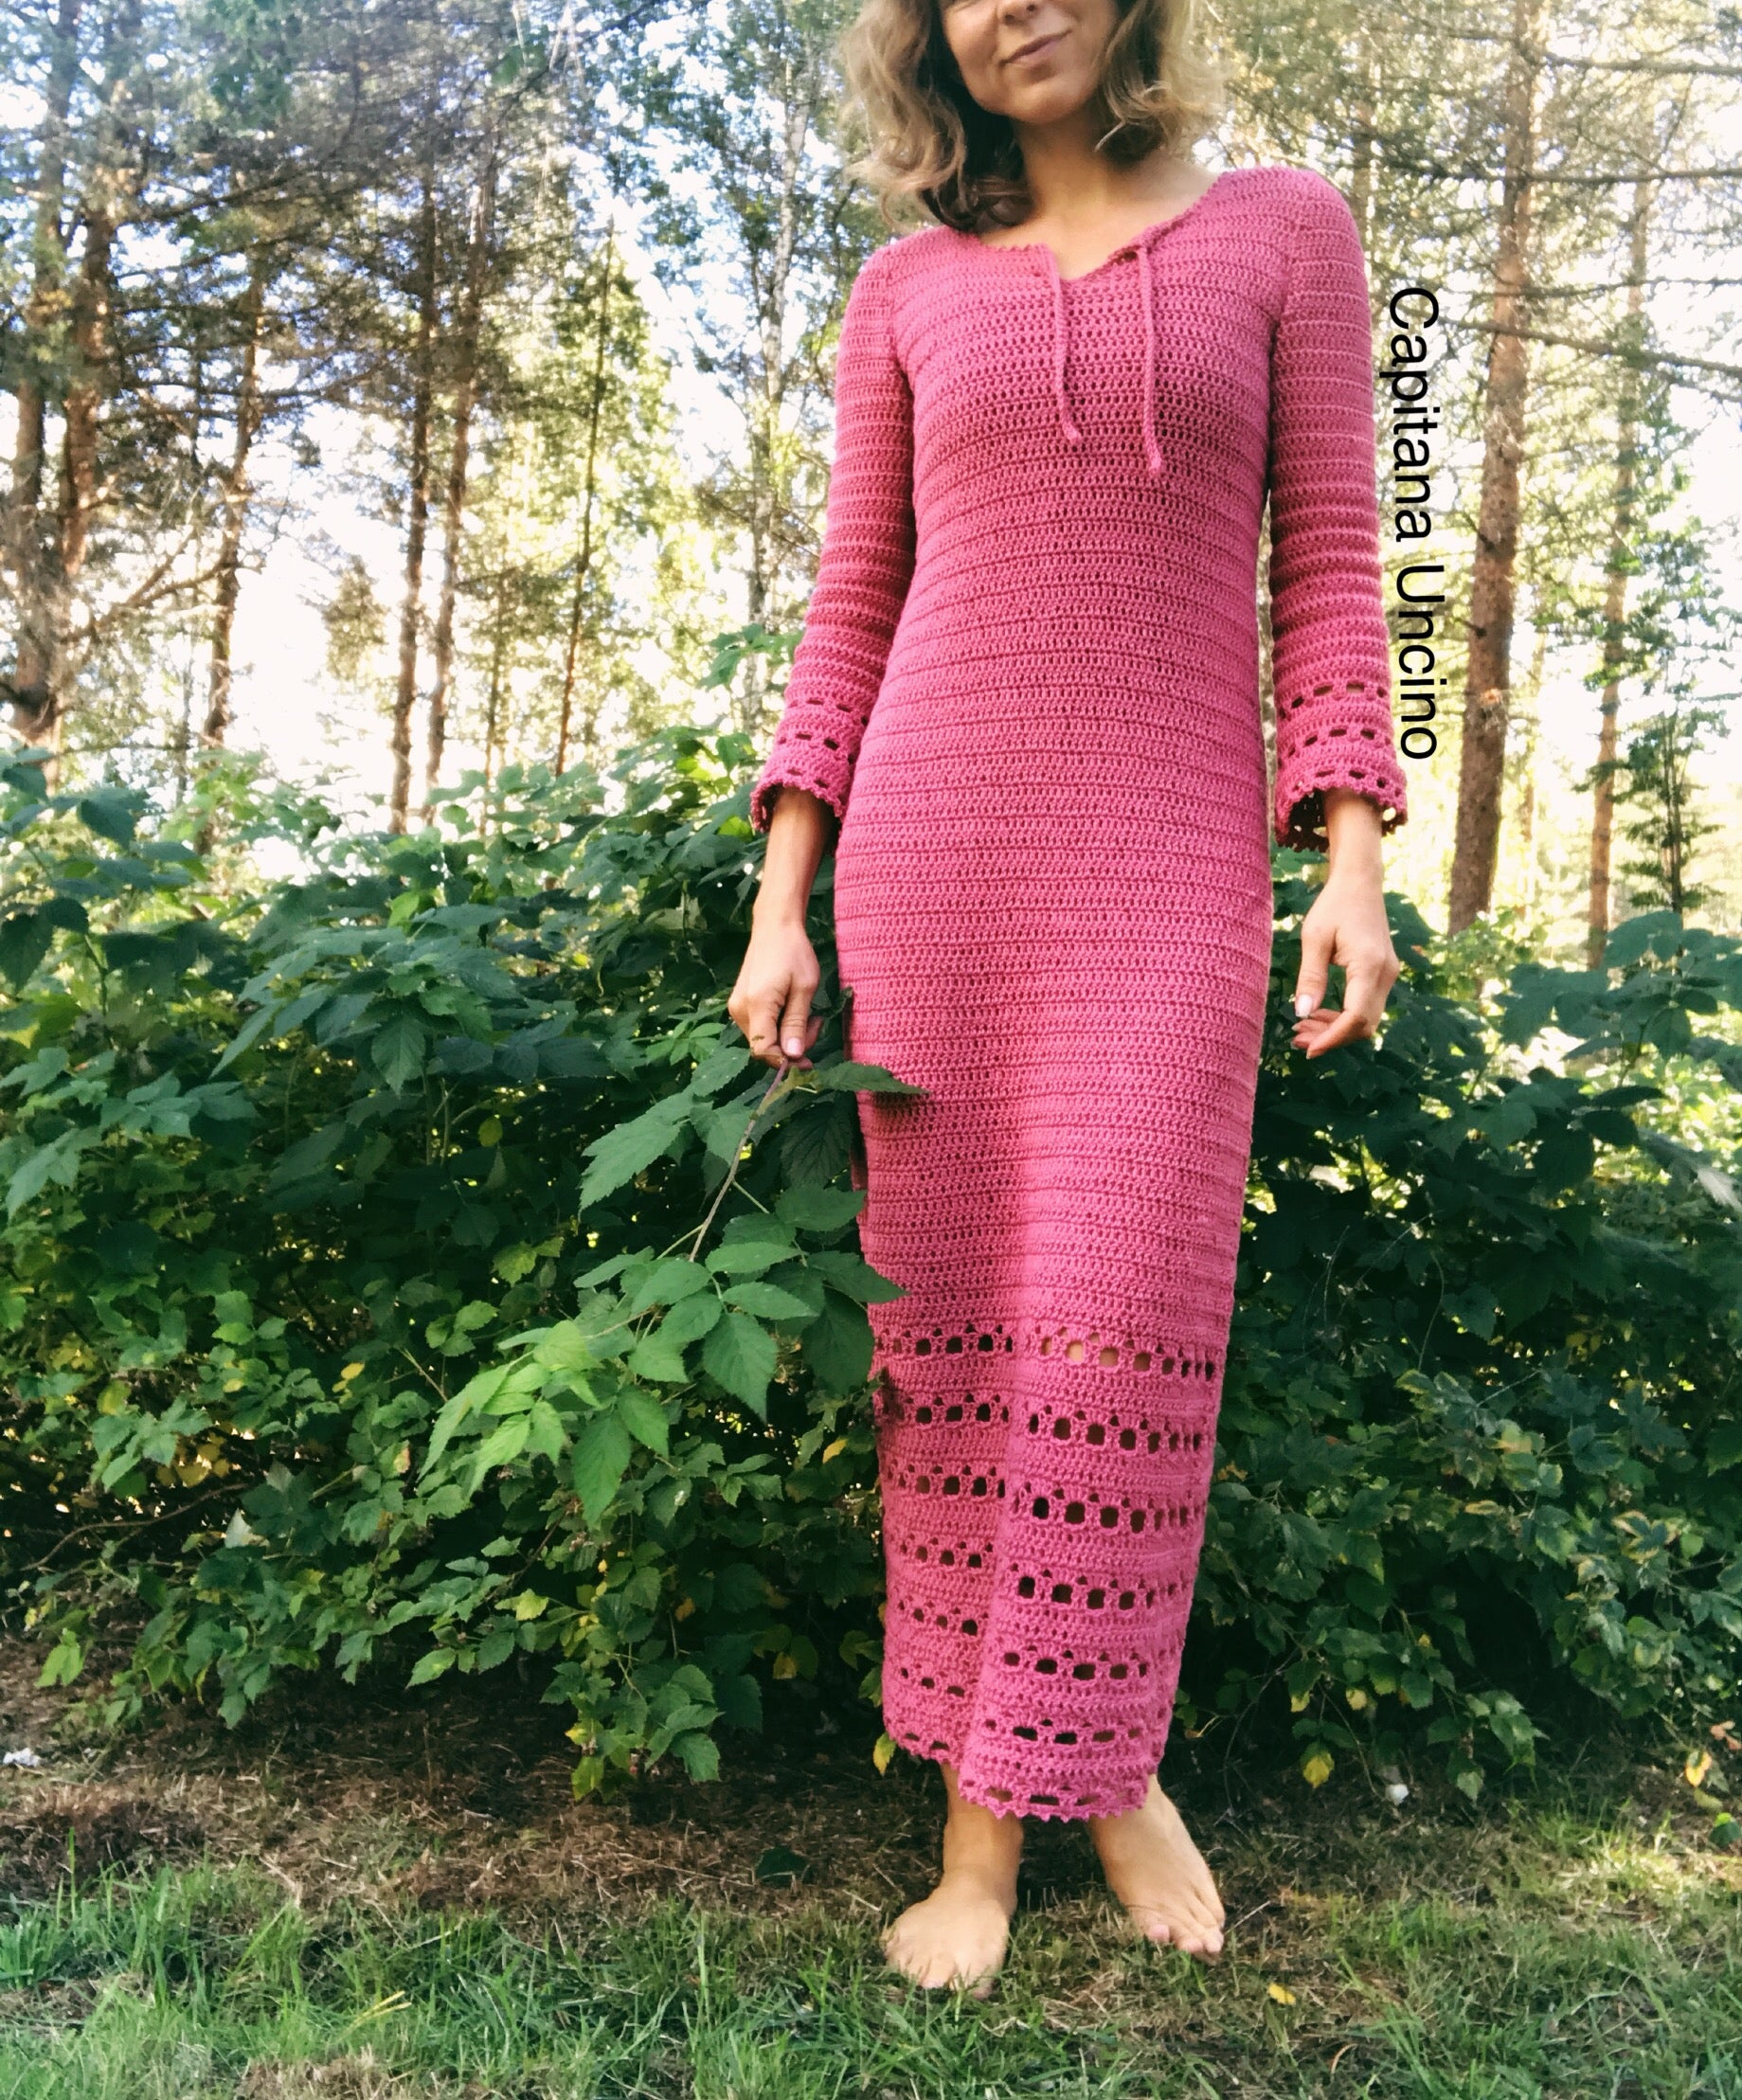 PDF-file for Crochet PATTERN, Magnolia Dress and cropped shirt, XS, S ...